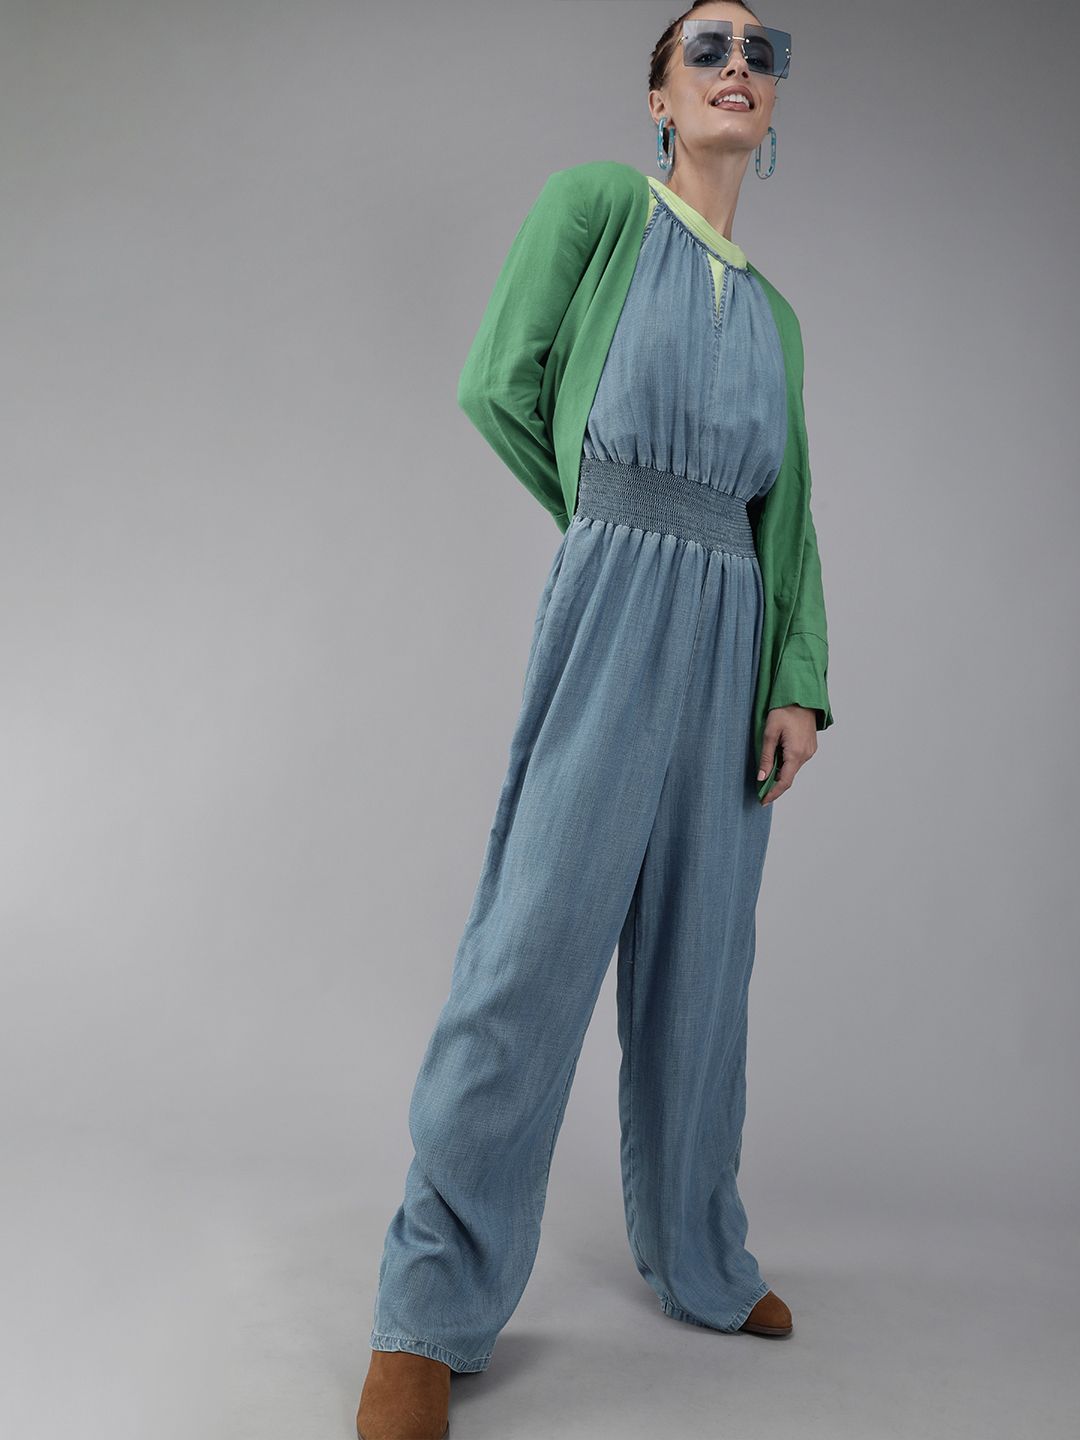 Vero Moda Women Blue Solid Chambray Basic Jumpsuit Price in India